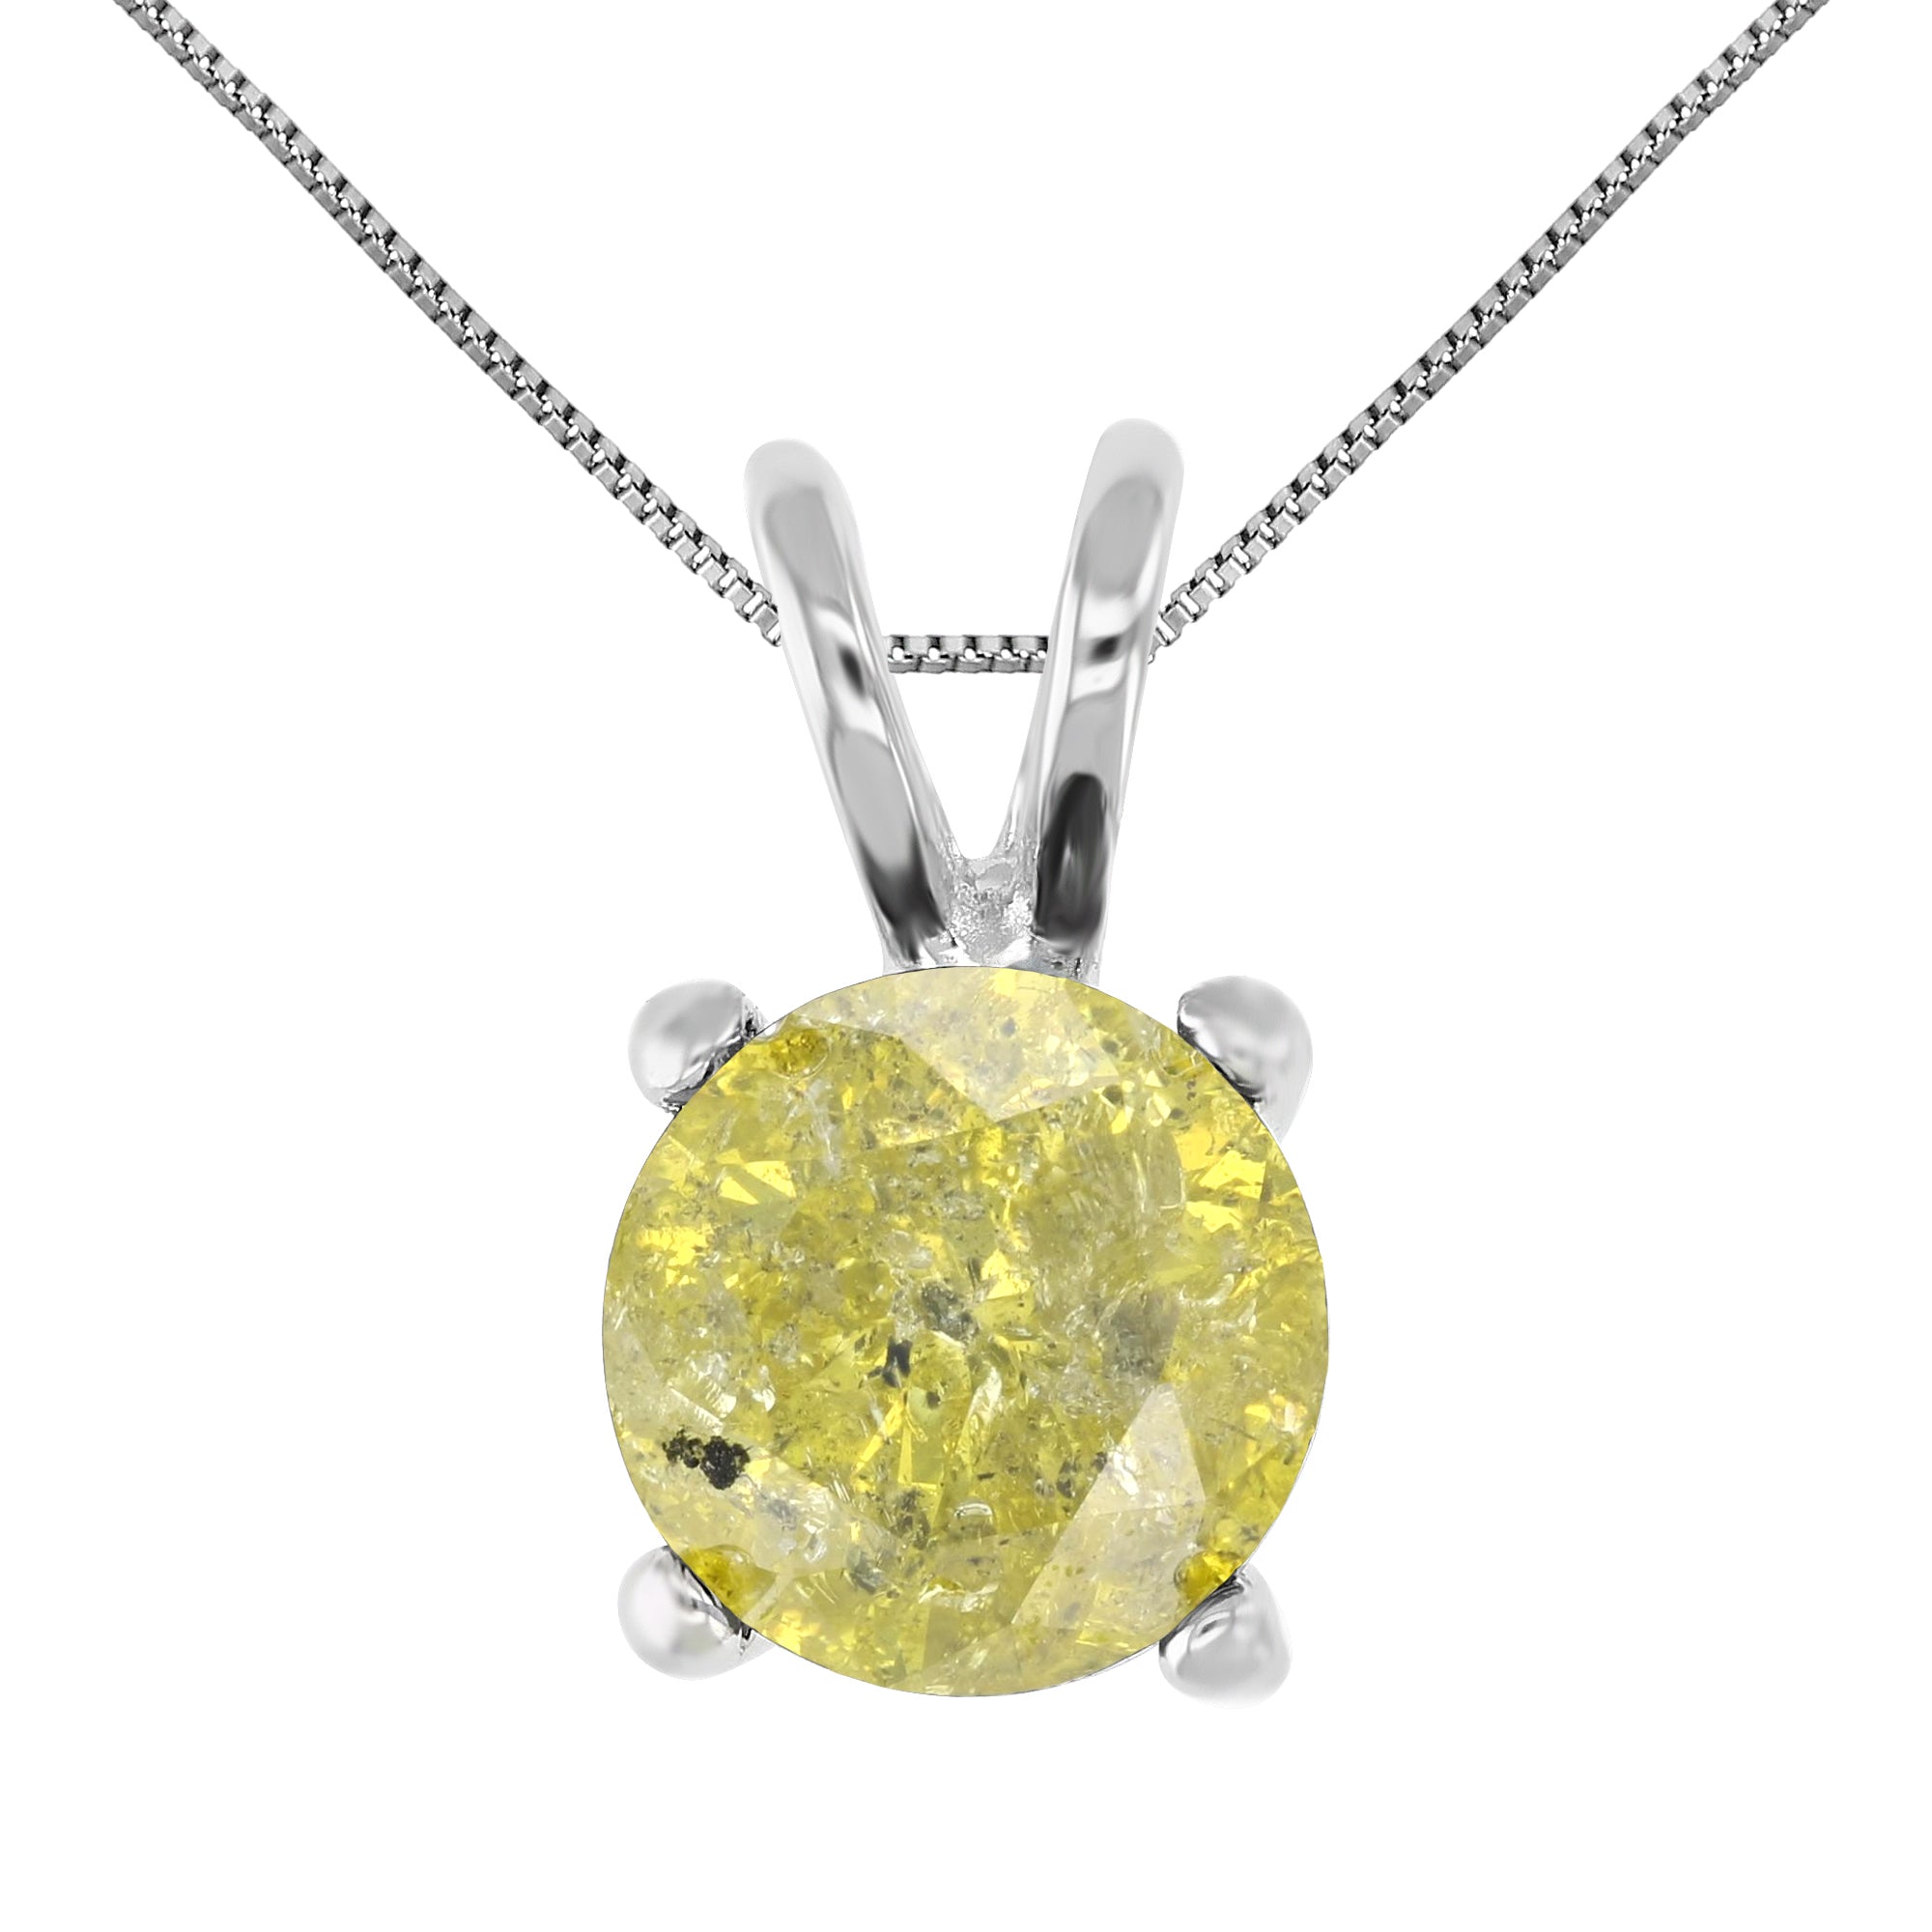 1.50 cttw Diamond Pendant, Yellow Diamond Solitaire Pendant Necklace for Women in 14K White Gold with 18 Inch Chain, Prong Setting